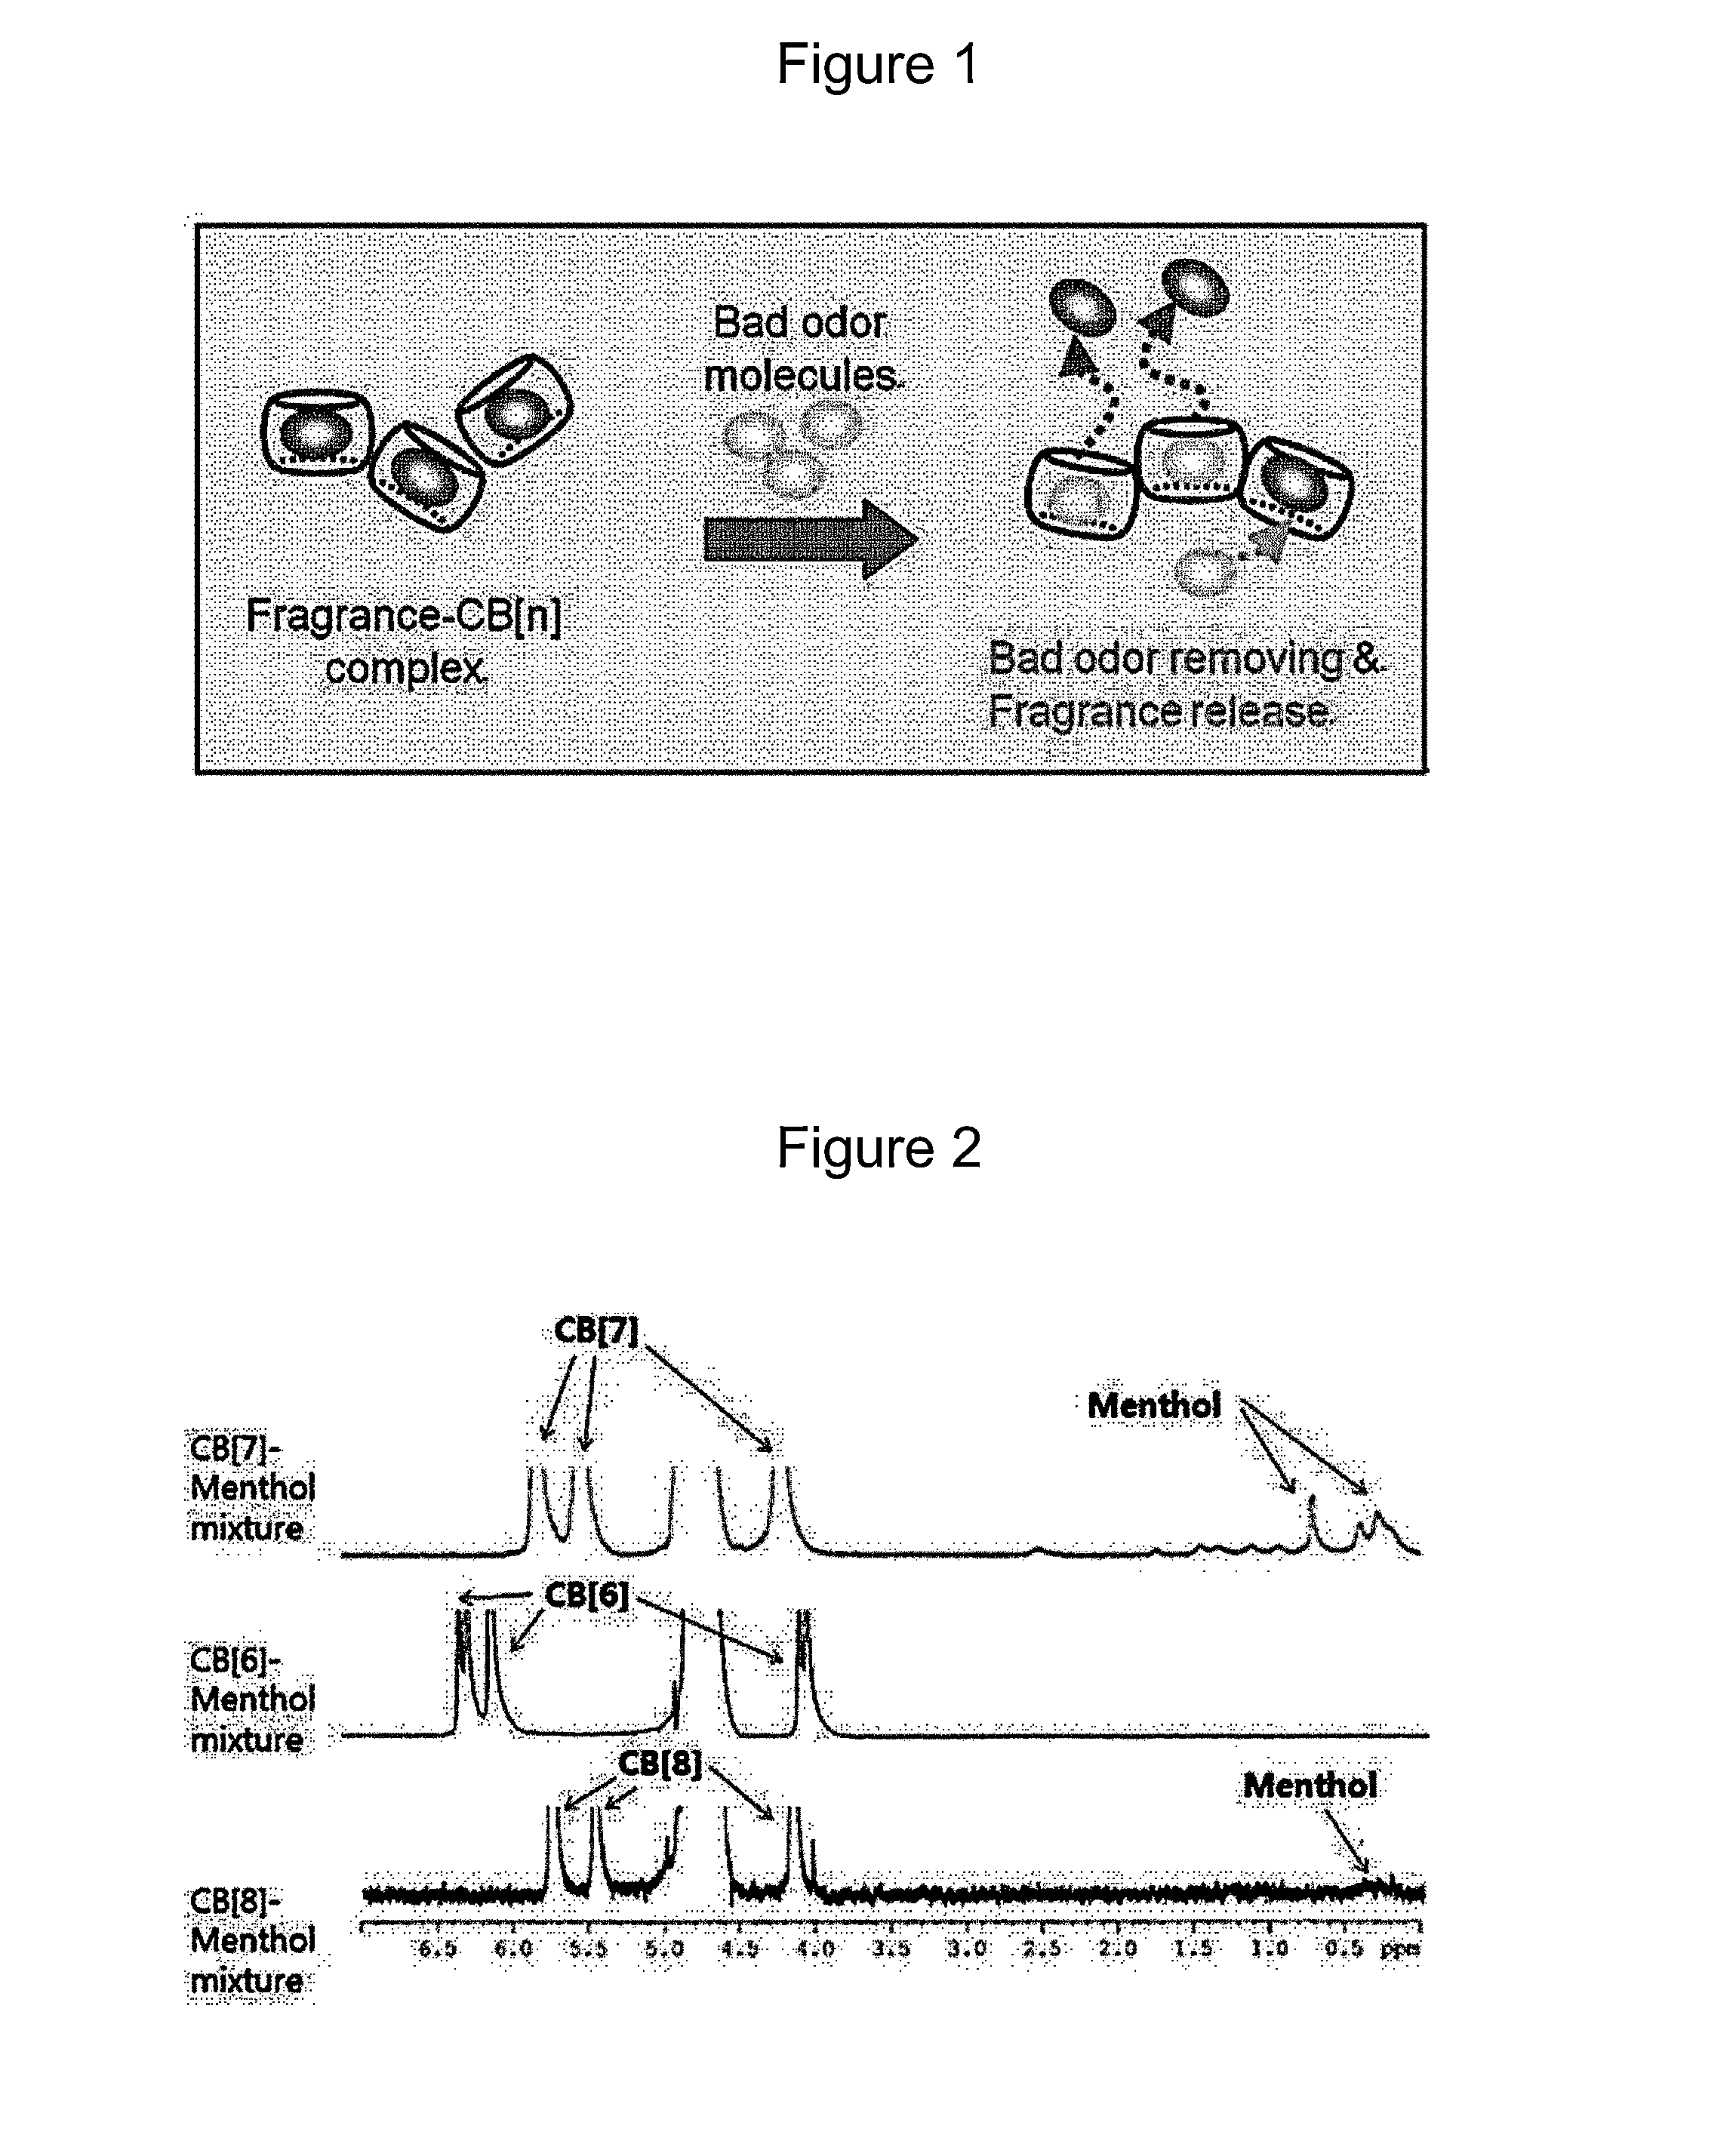 Composition for odor removal and fragrance emission comprising complexes of cucurbituril and fragrance